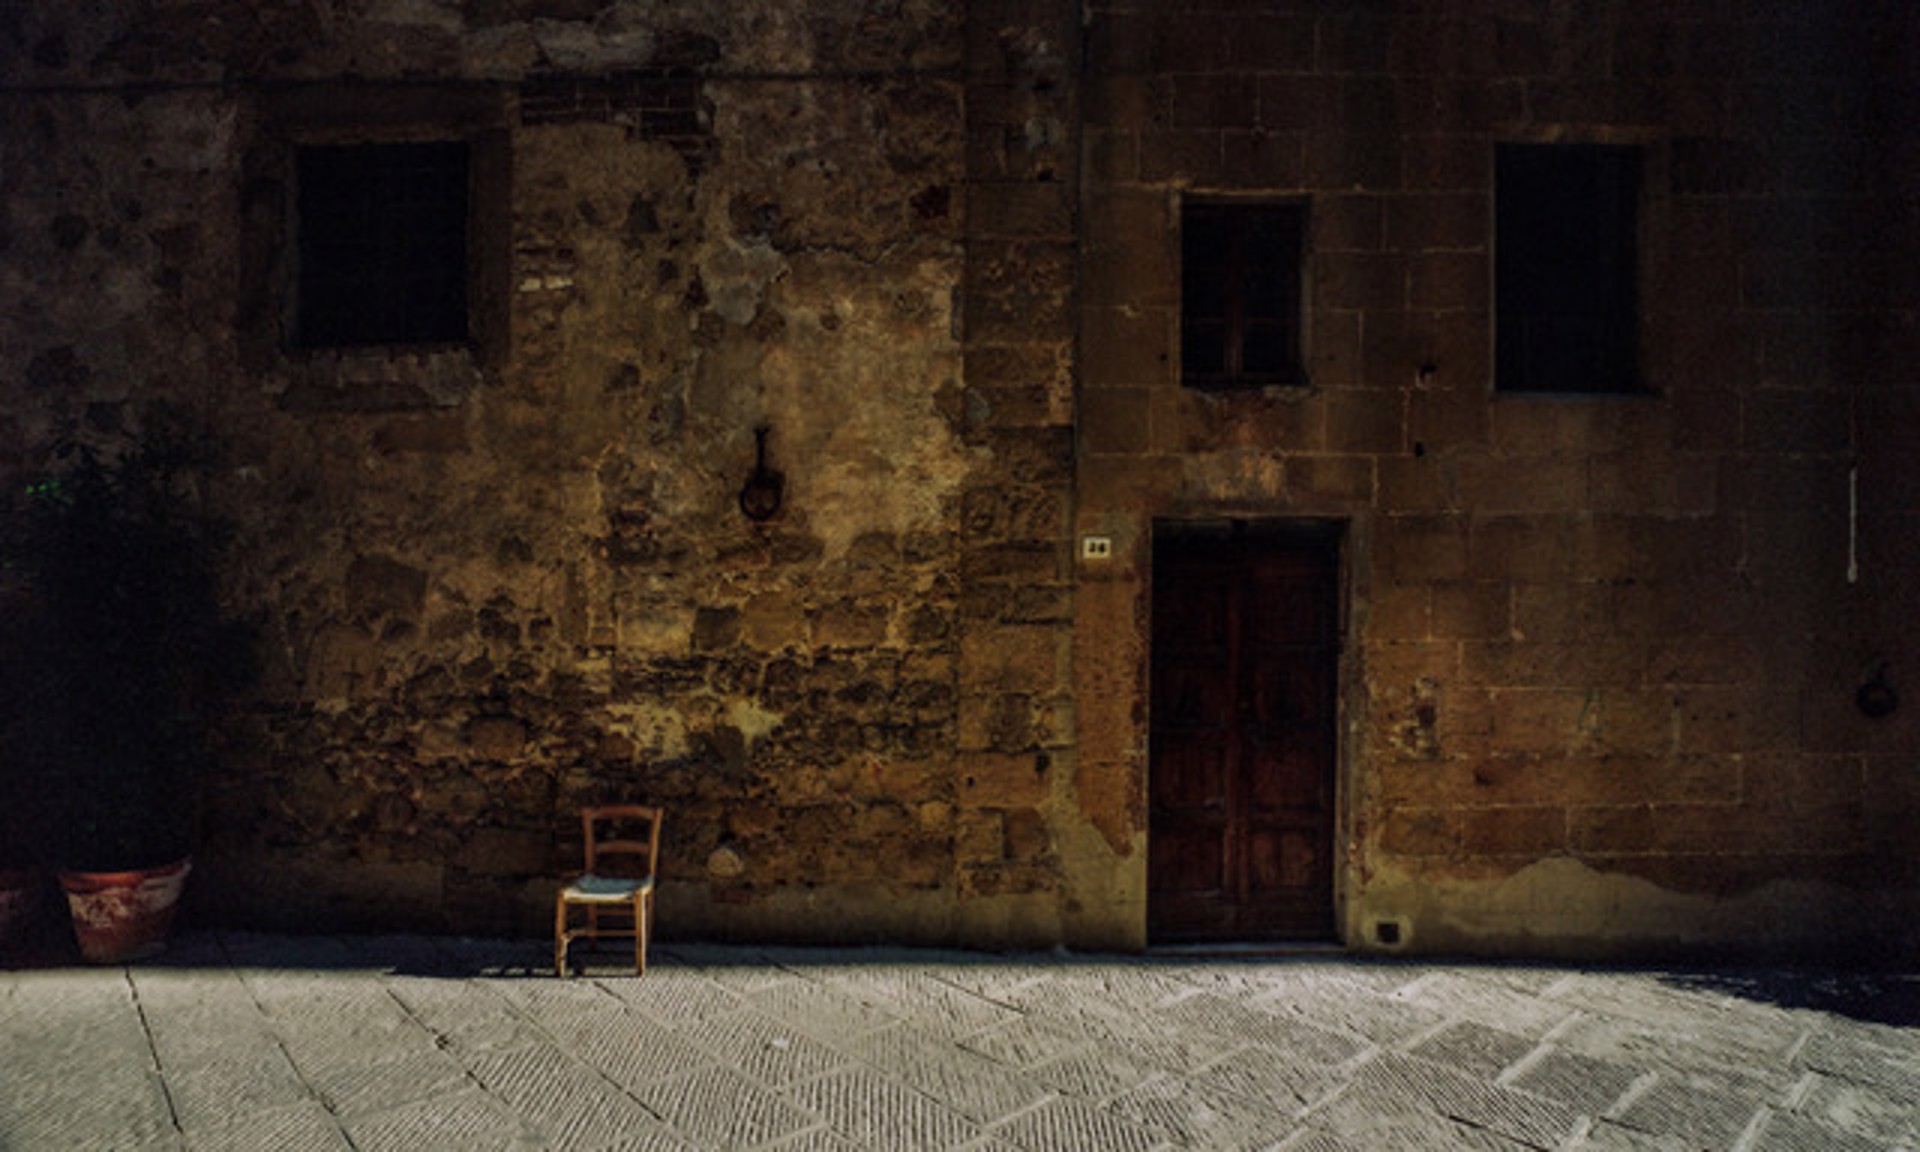 Chair for Socializing, On the Streets, Pienza, Italy by Lawrence McFarland